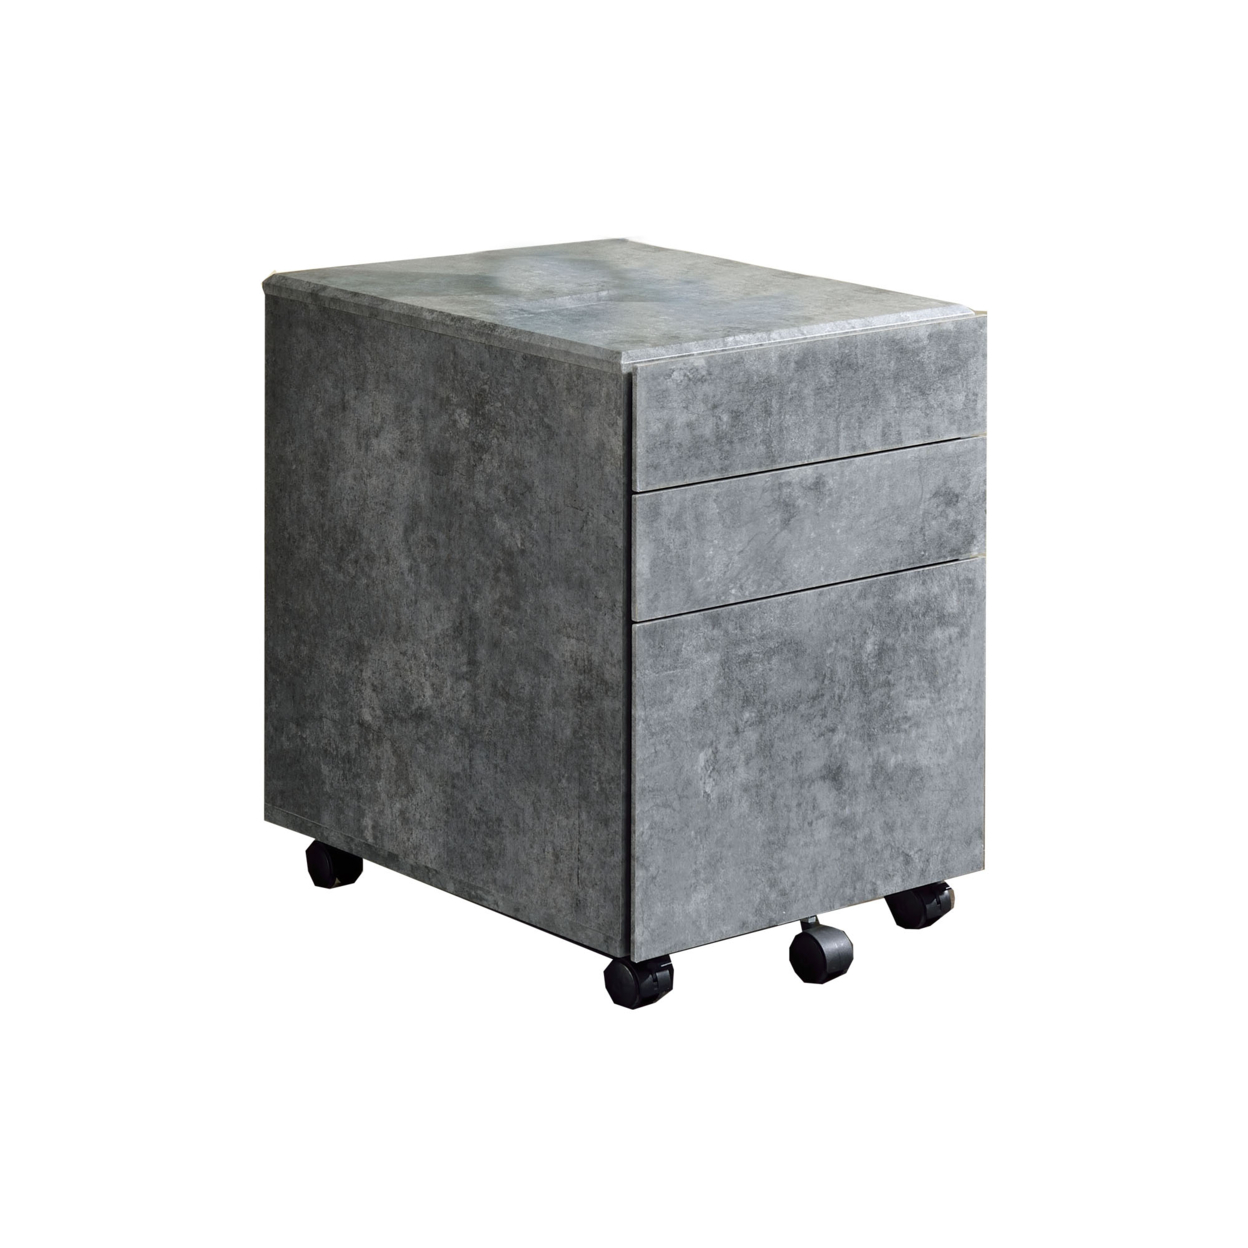 Contemporary Style File Cabinet With 3 Storage Drawers And Casters, Gray- Saltoro Sherpi